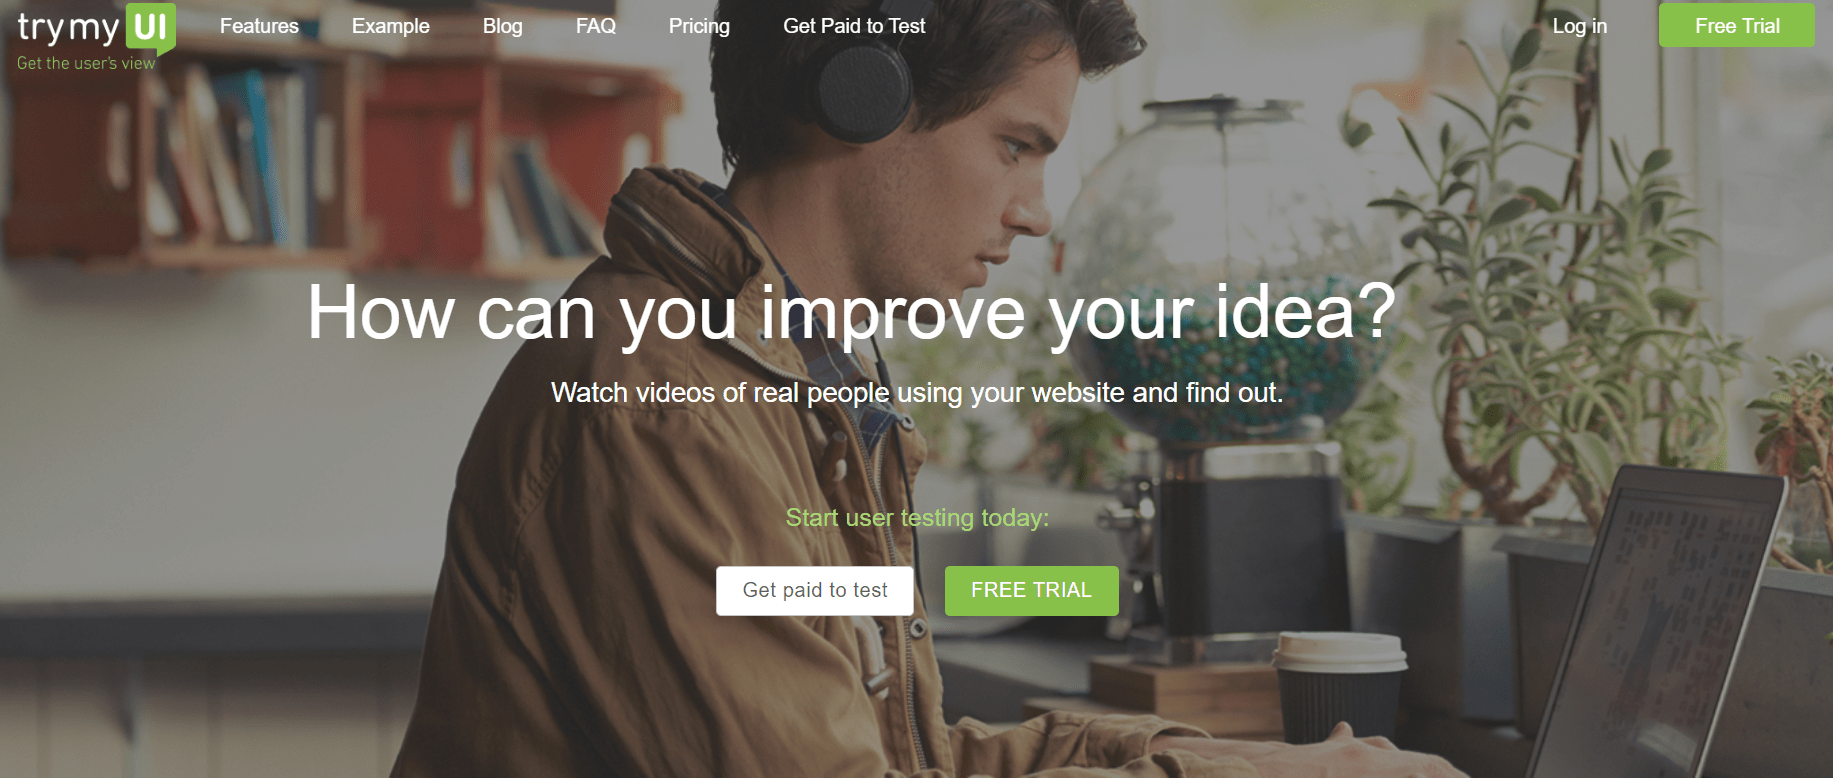 TryMyUI review home -improve your idea